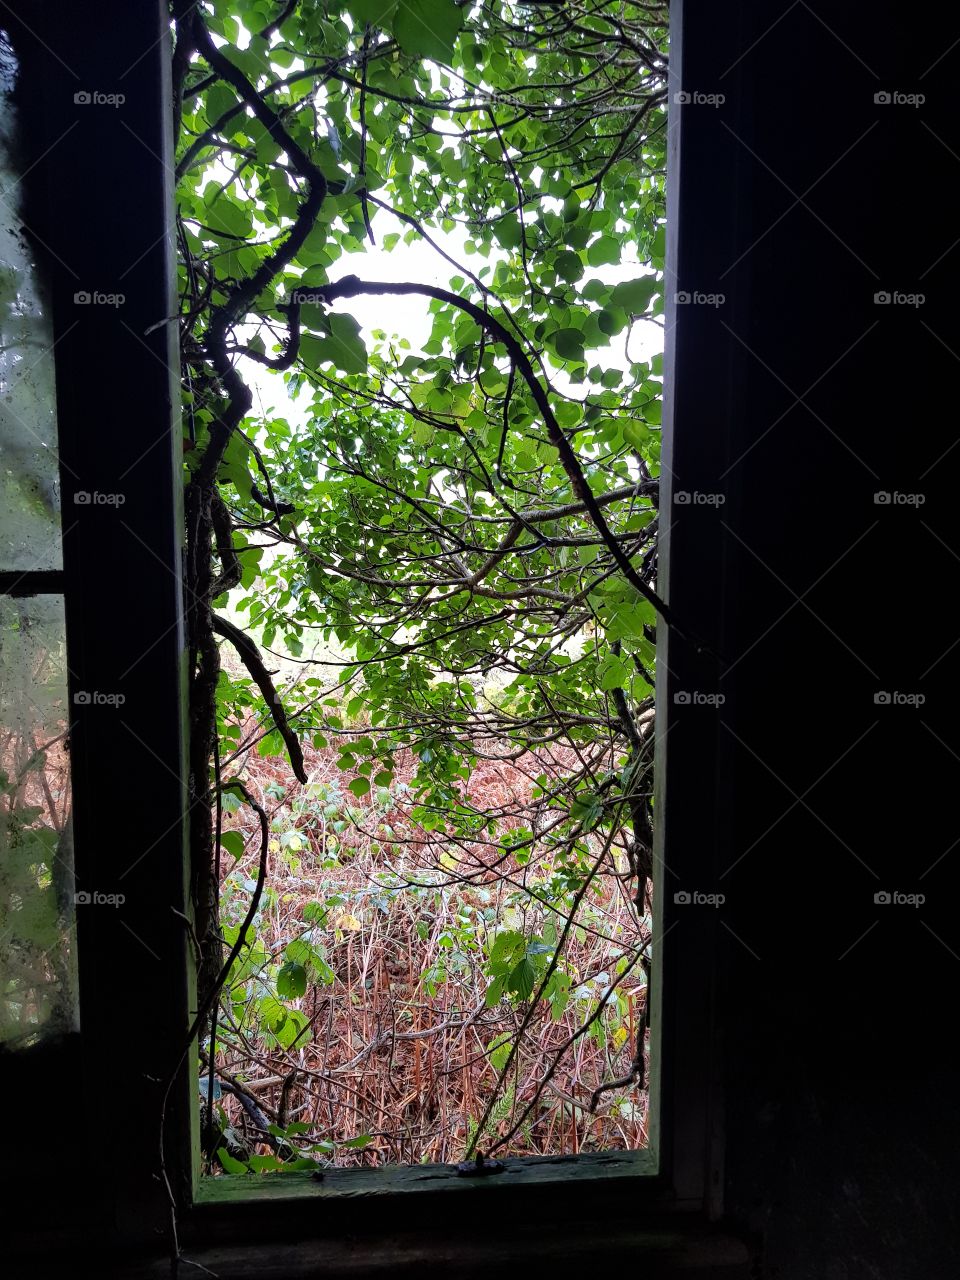 looking out of the window of a derelict building